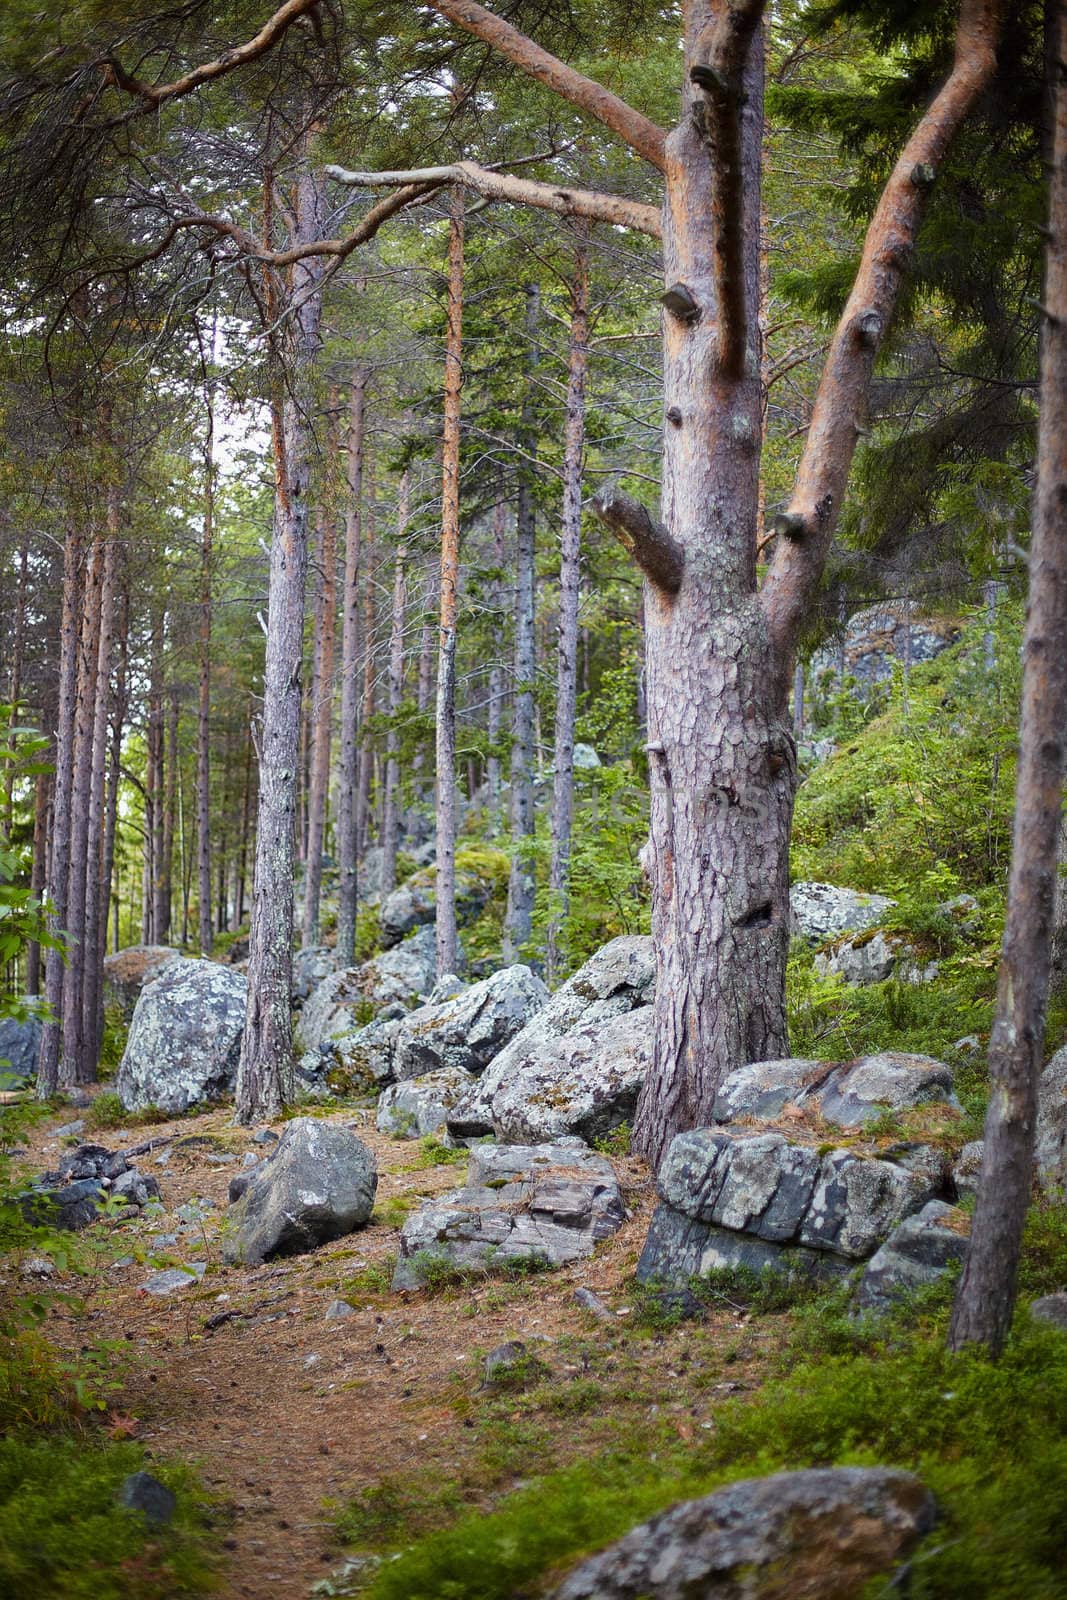 Day landscape - northern coniferous wood on a stony slope of mountain